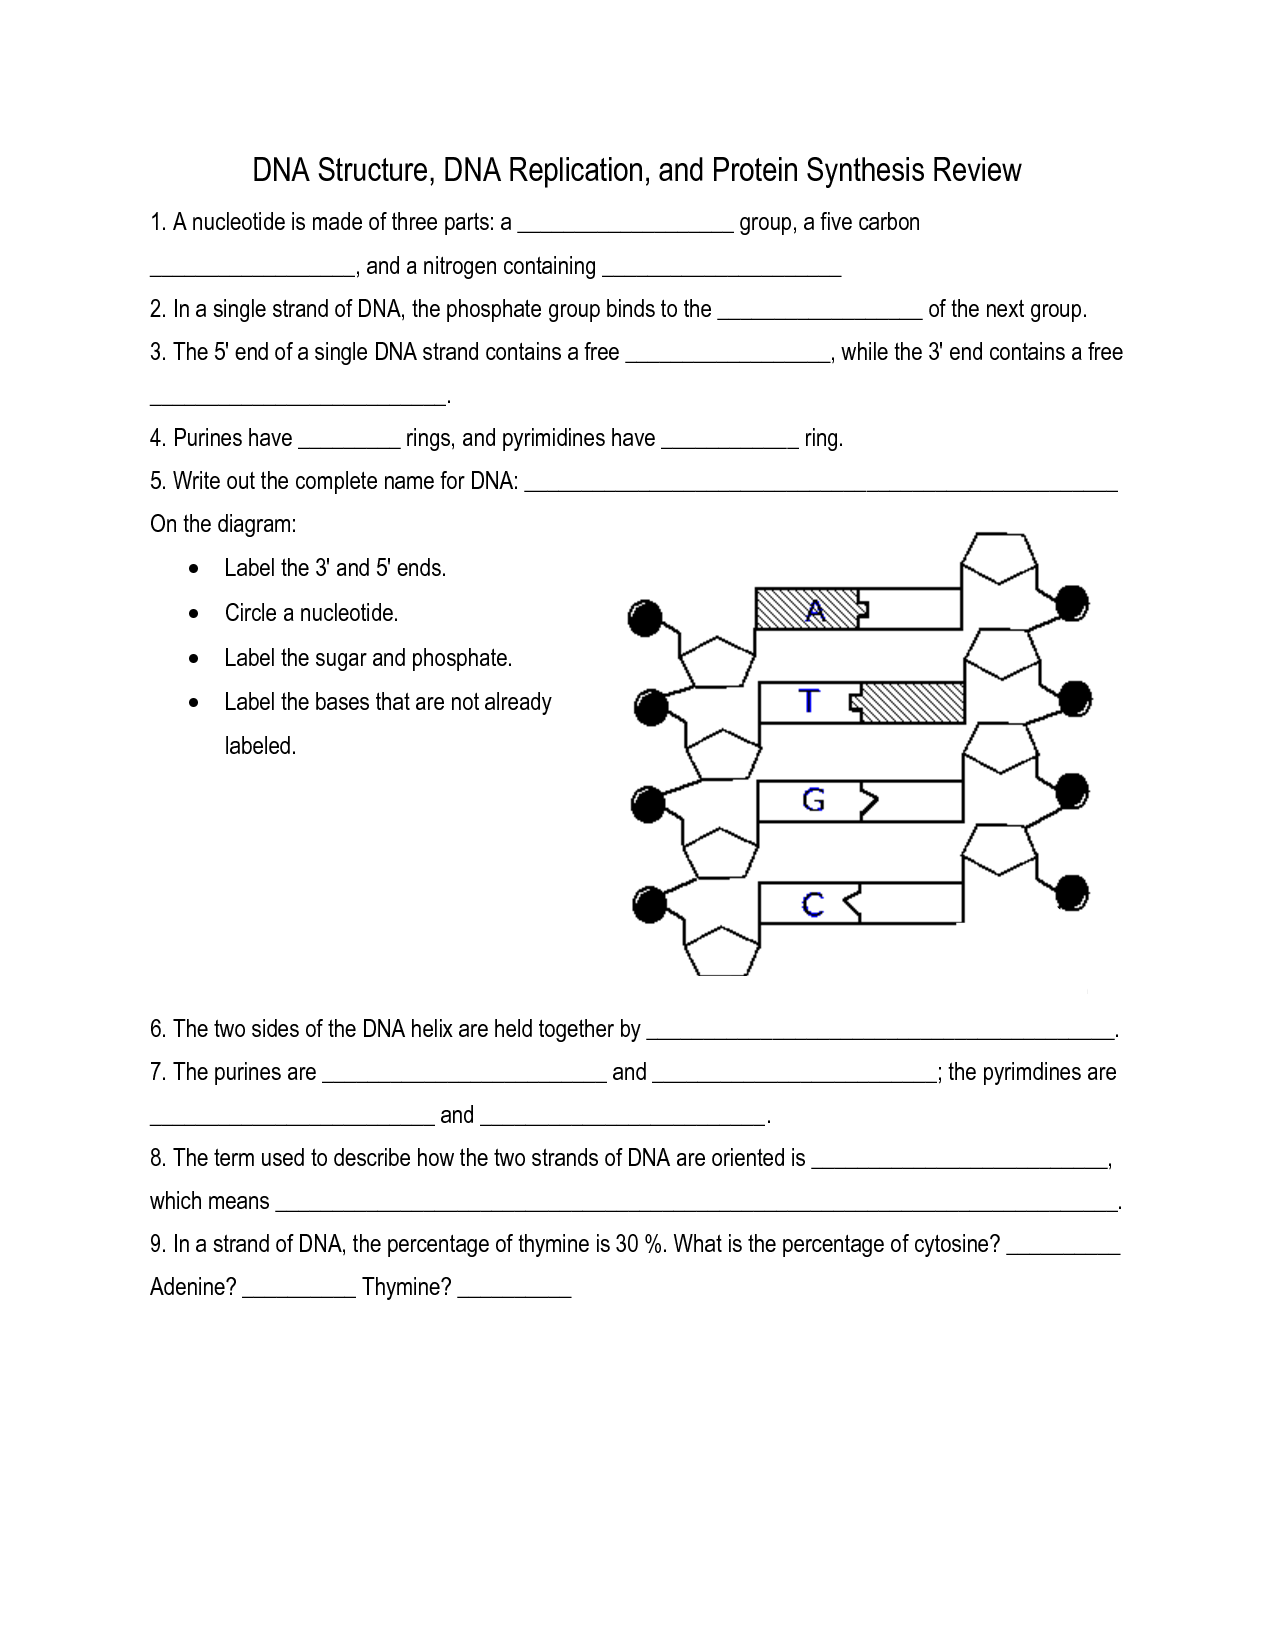 dna-replication-worksheet-answers